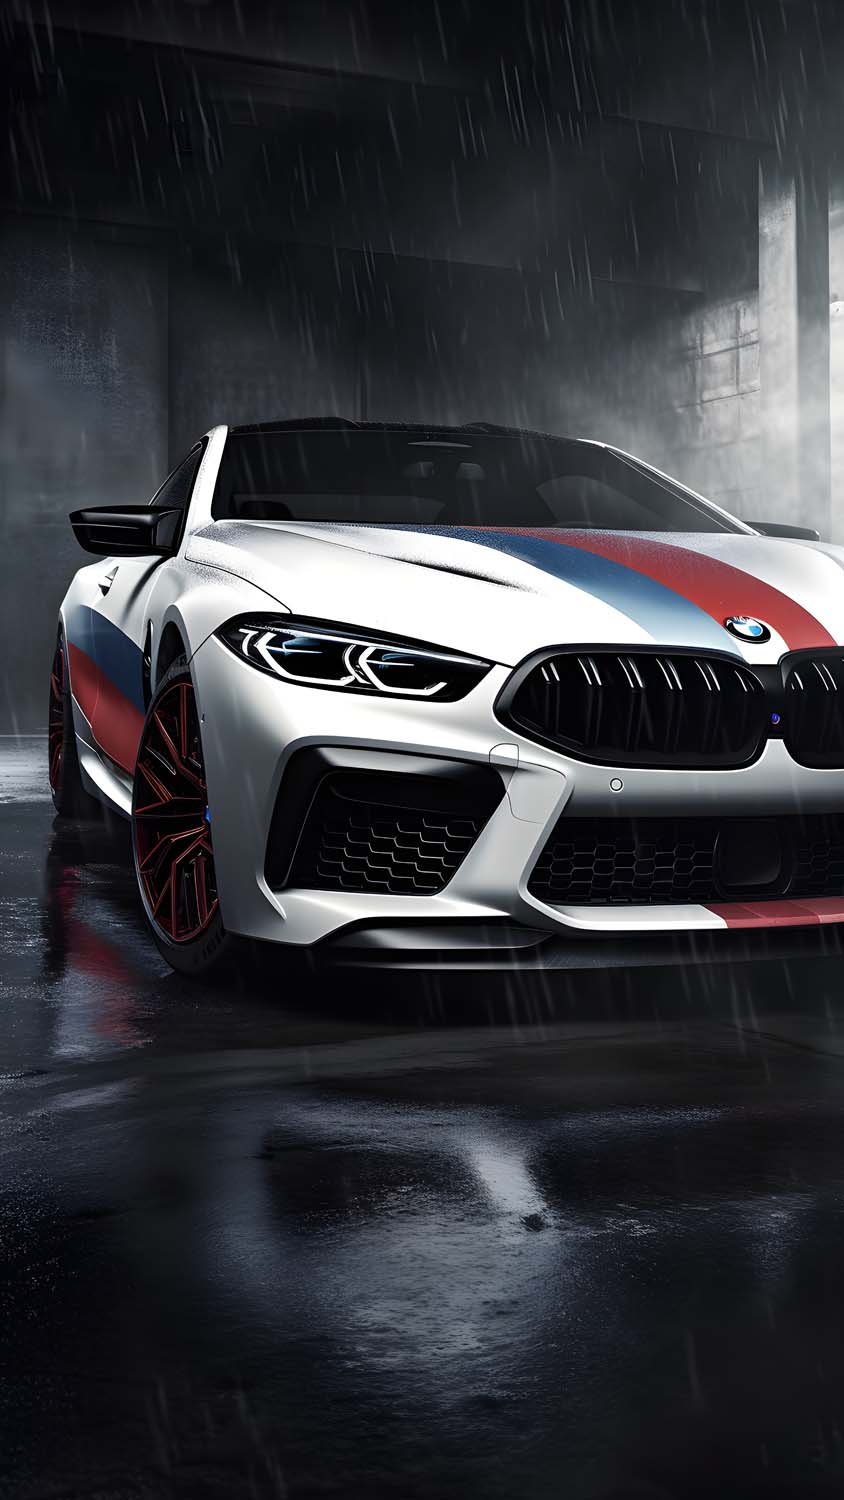 Bmw Race Edition Iphone Wallpaper Hd - Iphone Wallpapers : Iphone Wallpapers